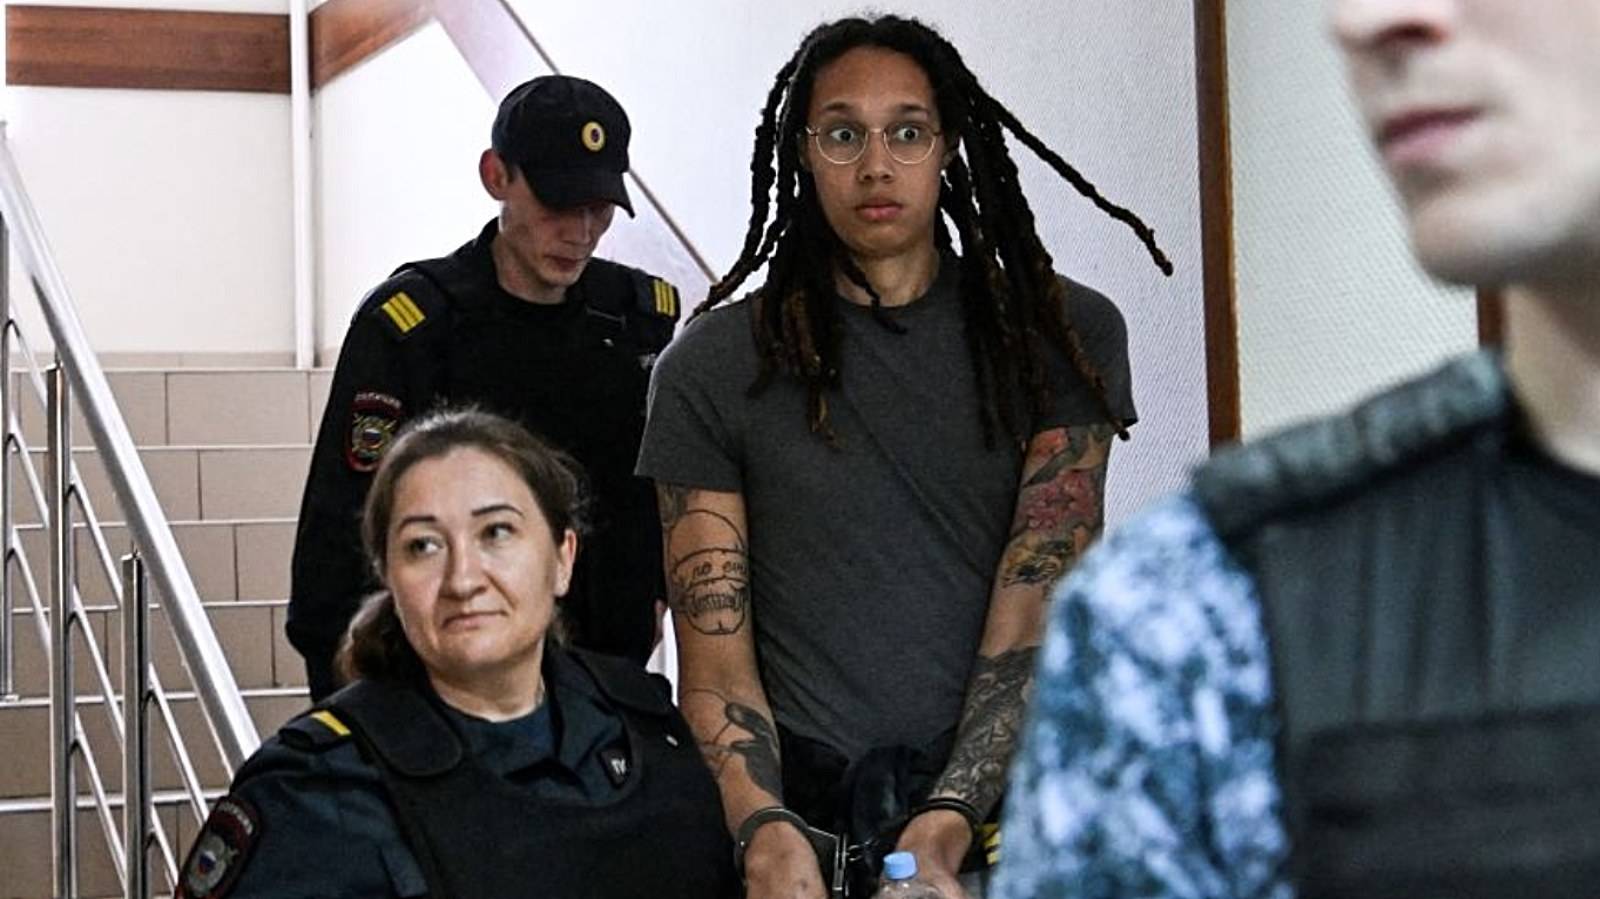 US WNBA basketball superstar Brittney Griner arrives to a hearing at the Khimki Court, outside Moscow on June 27, 2022. - Griner, a two-time Olympic gold medallist and WNBA champion, was detained at Moscow airport in February on charges of carrying in her luggage vape cartridges with cannabis oil, which could carry a 10-year prison sentence.   